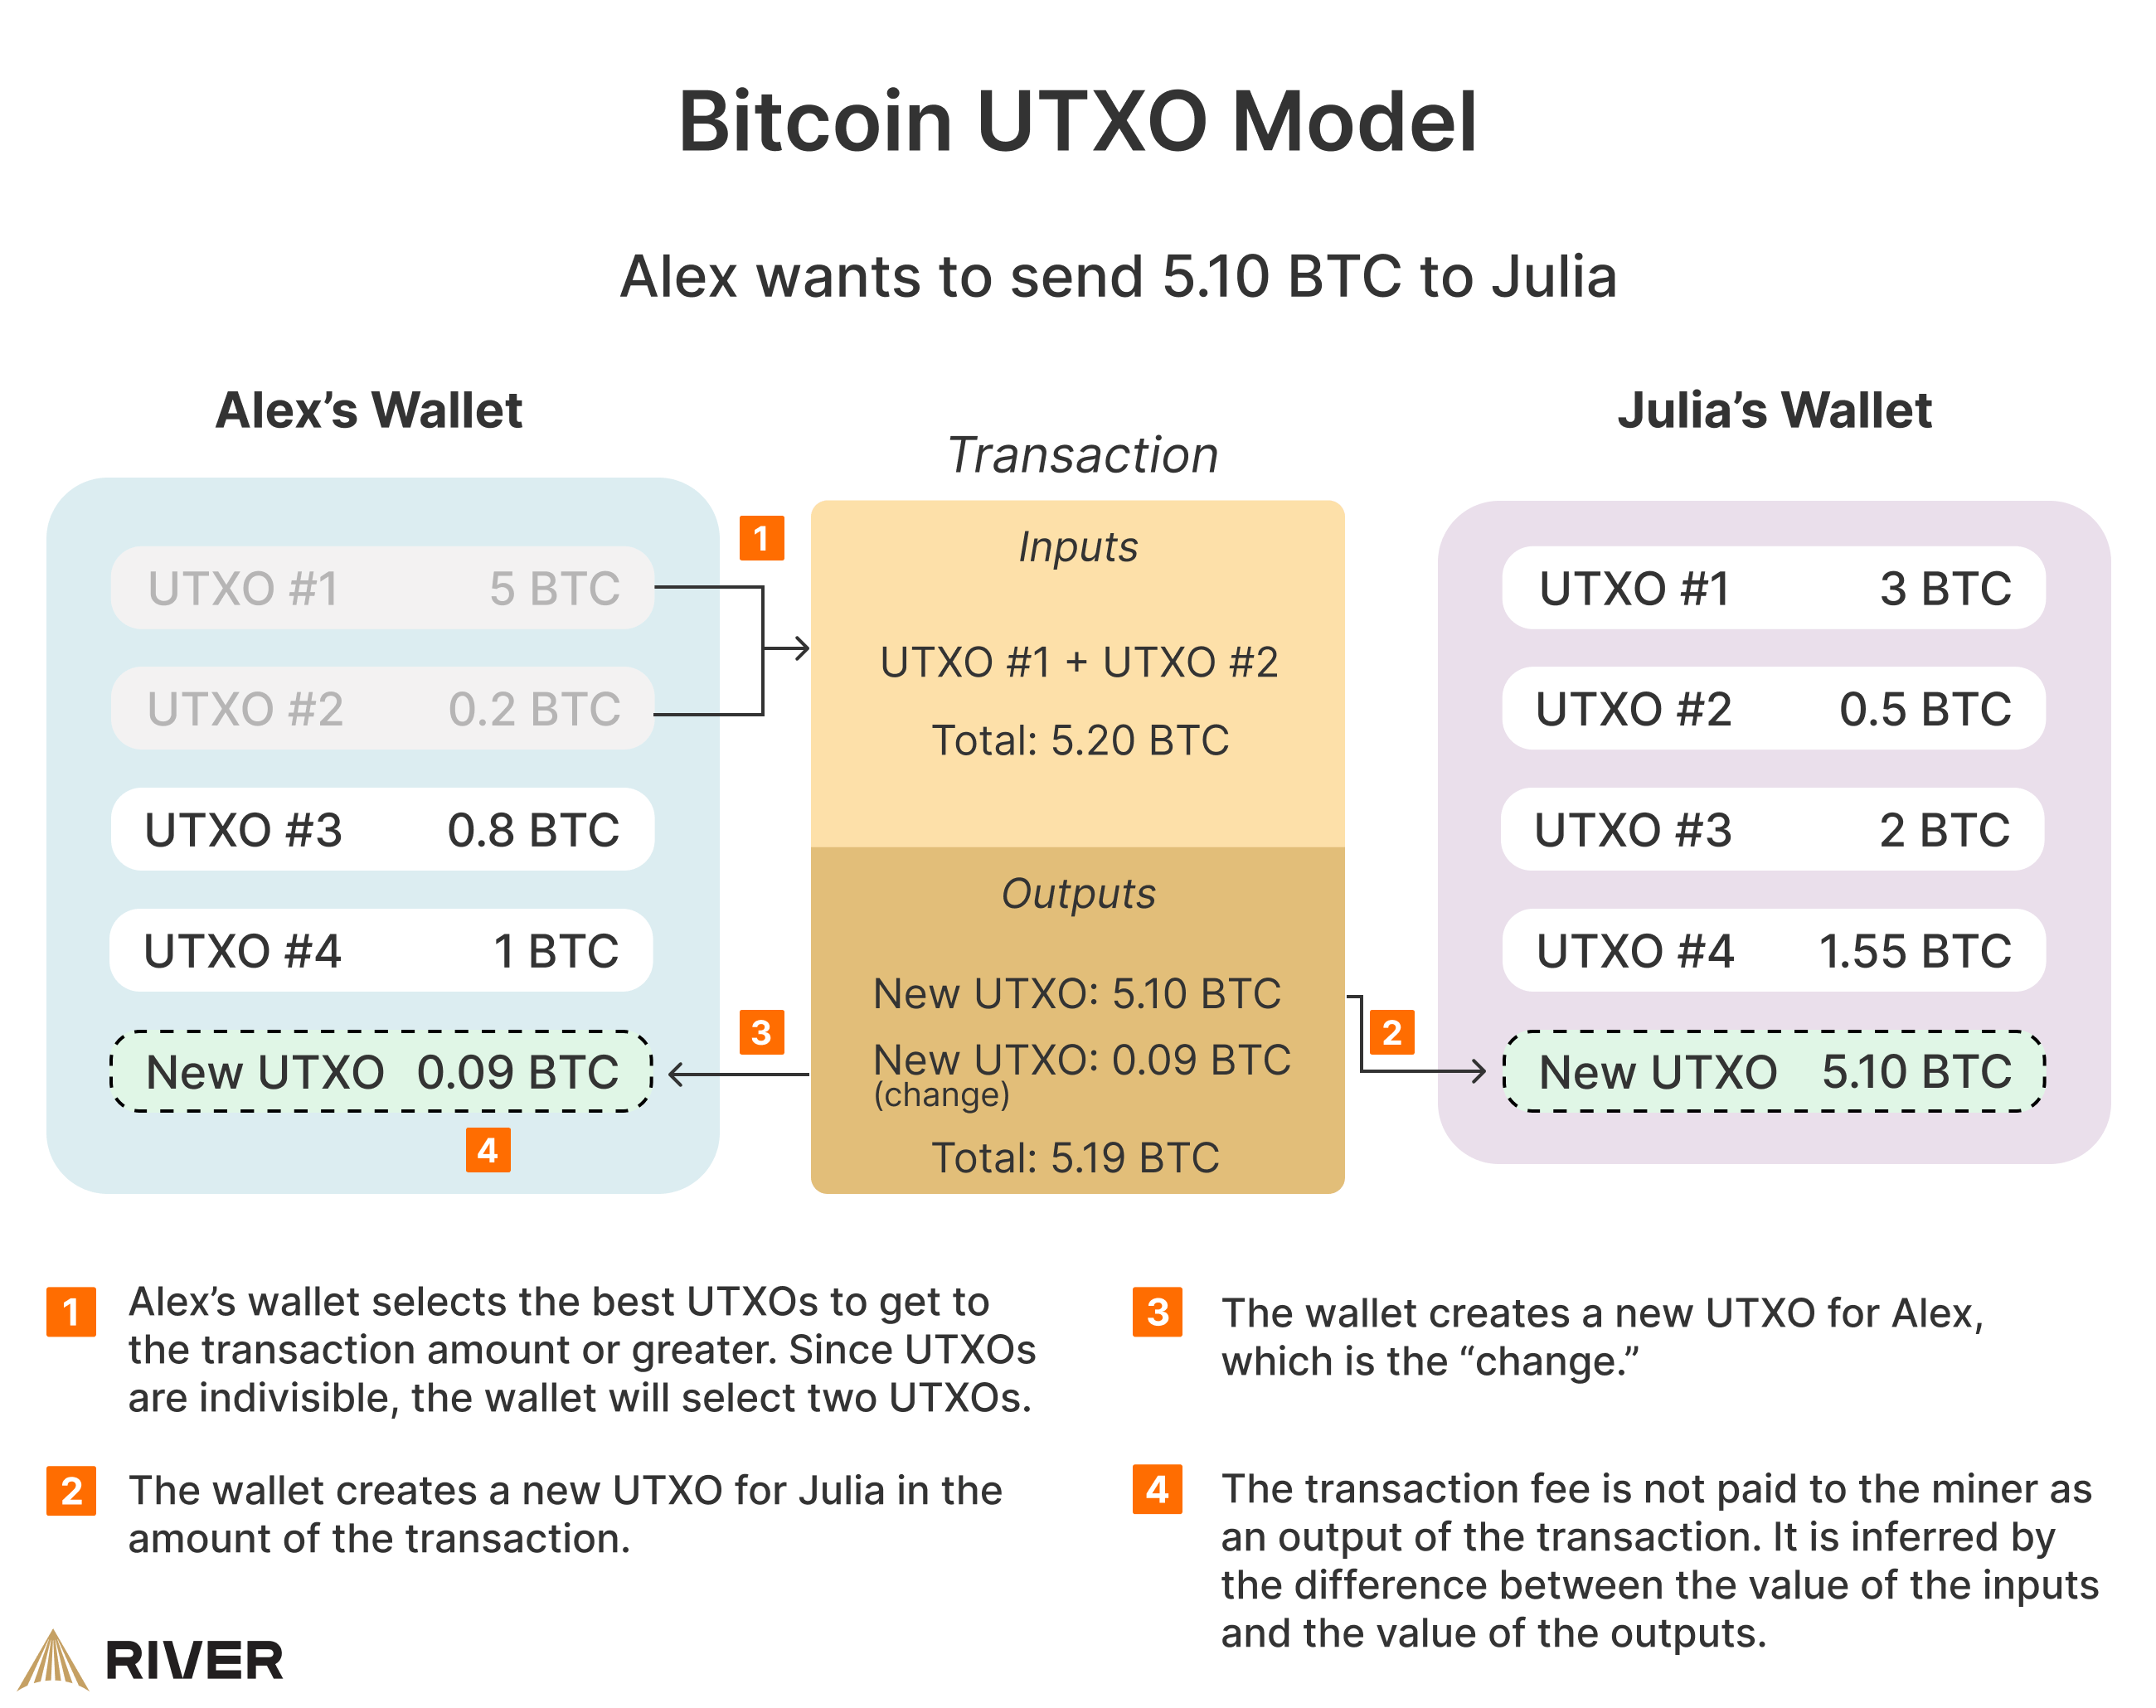 Bitcoin UTXO model showing Alex&rsquo;s wallet transferring 5.10 BTC to Julia with inputs, outputs, and fees